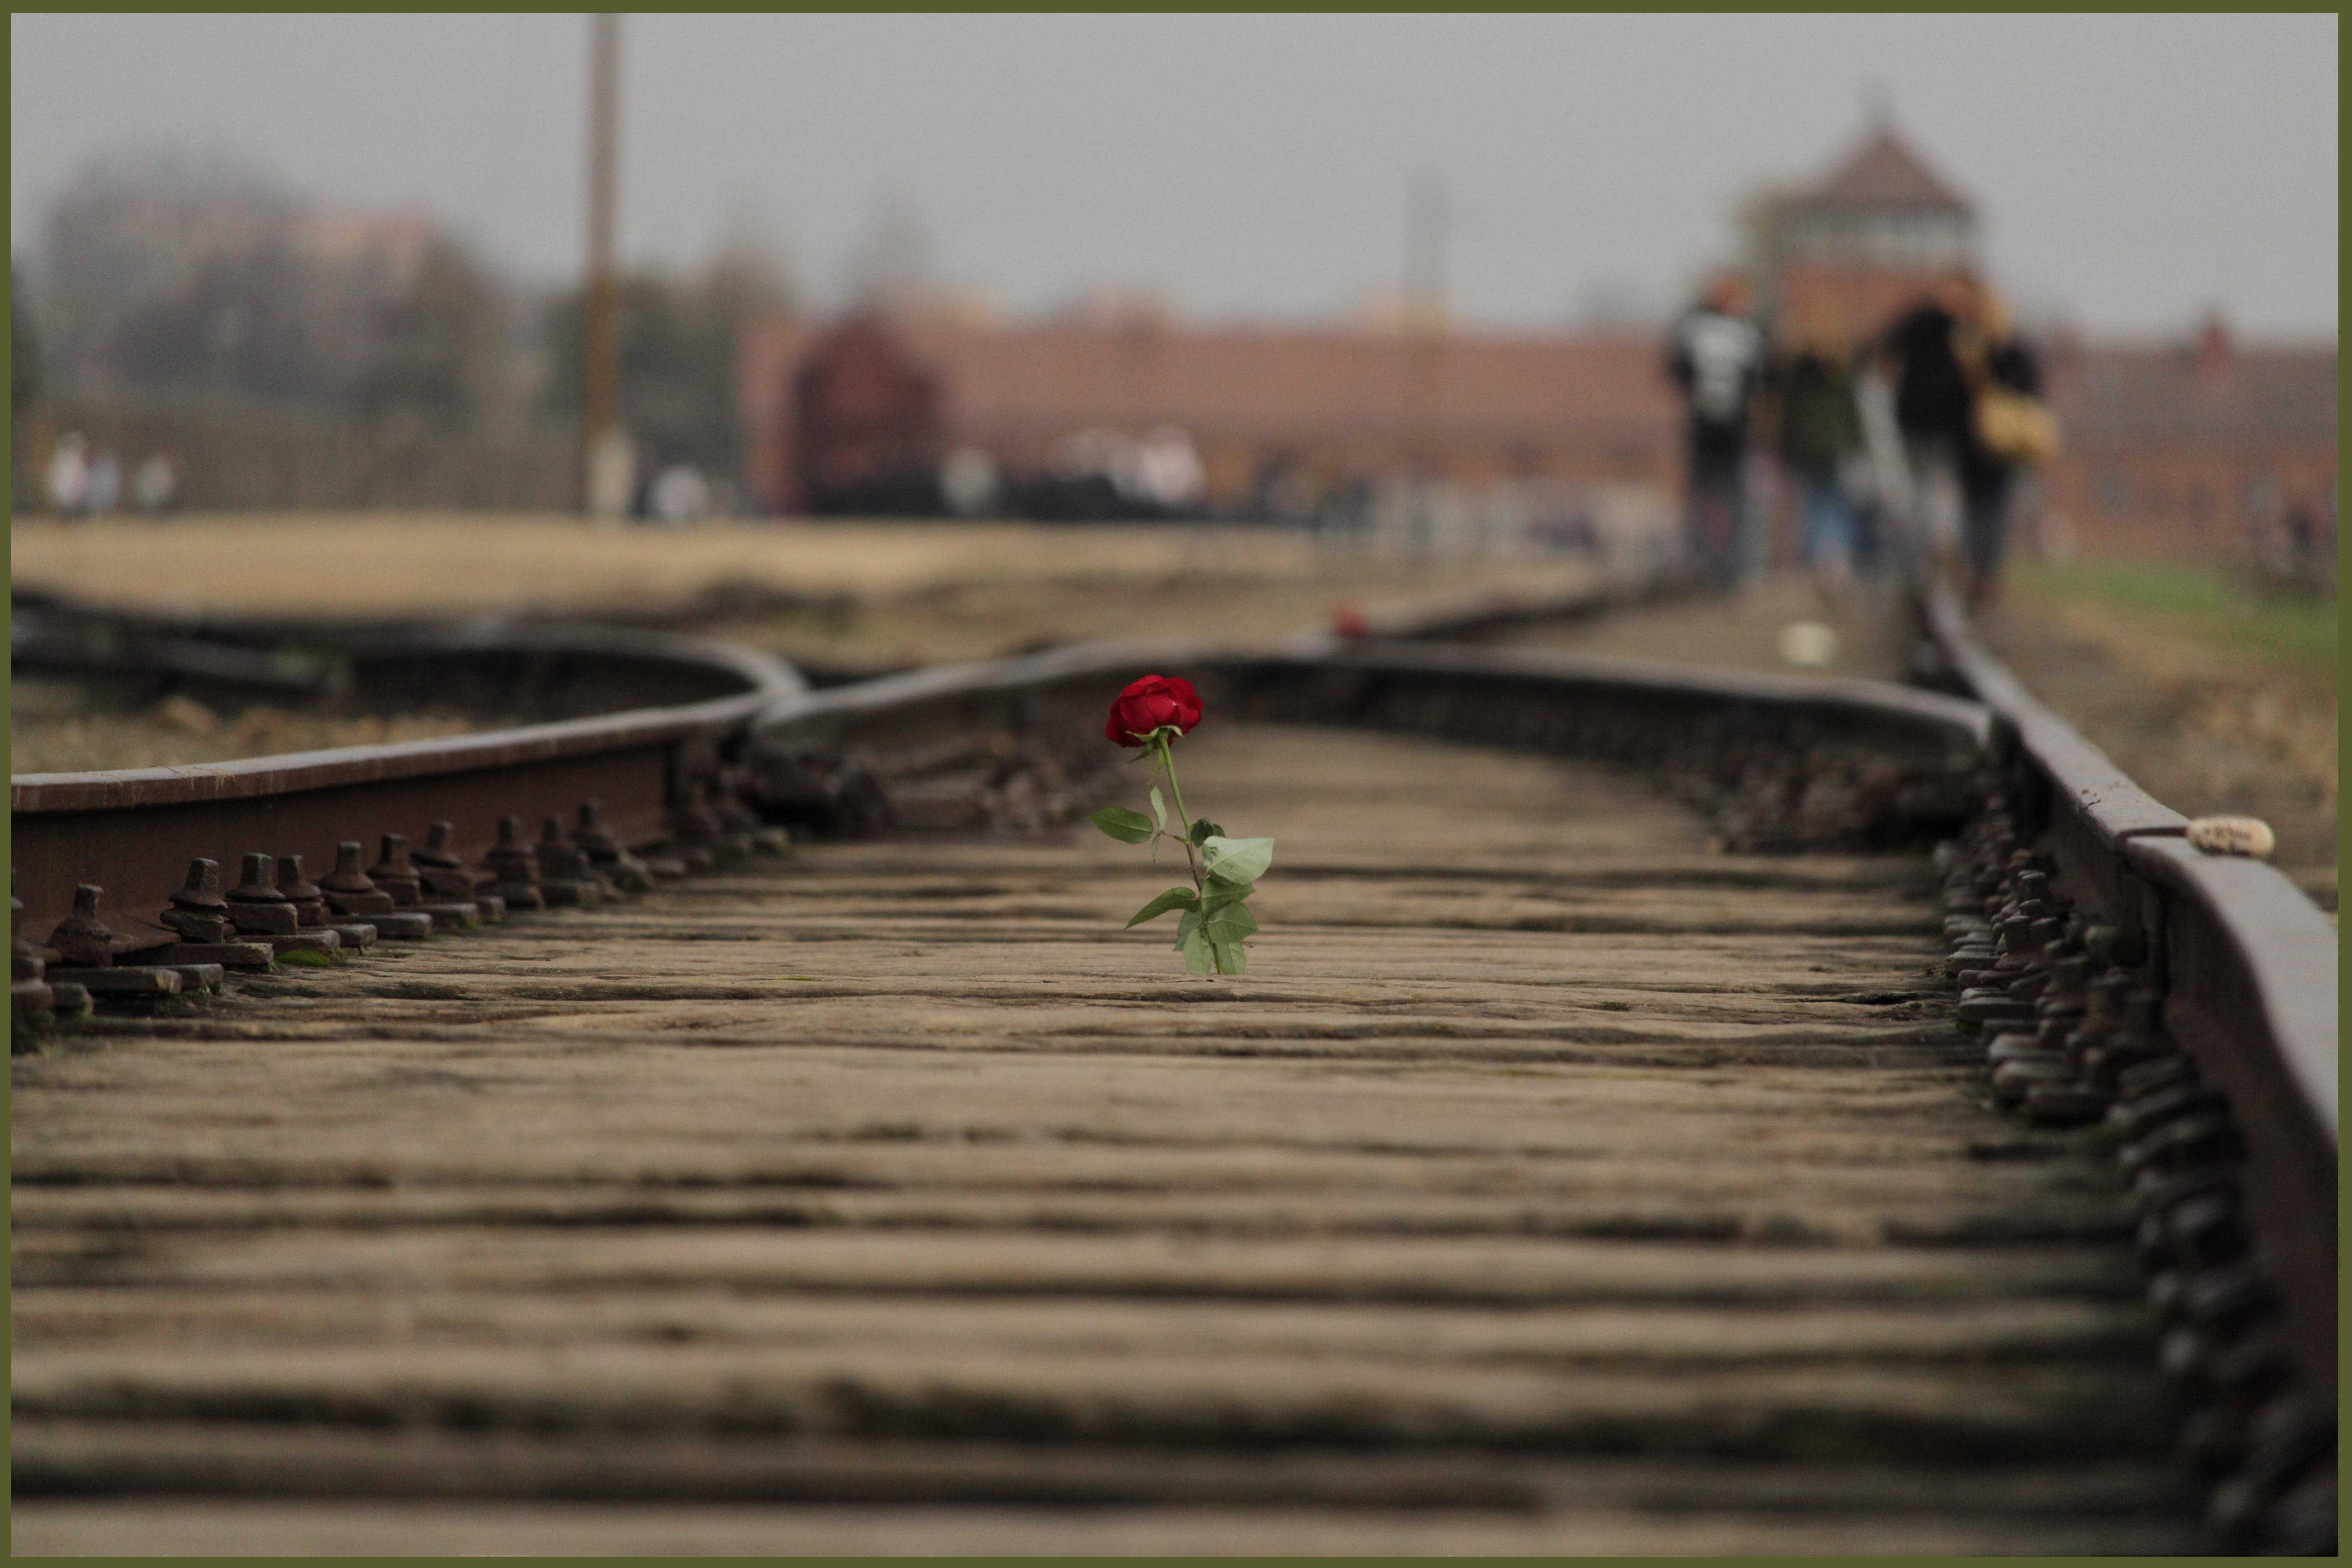 Auschwitz with a rose